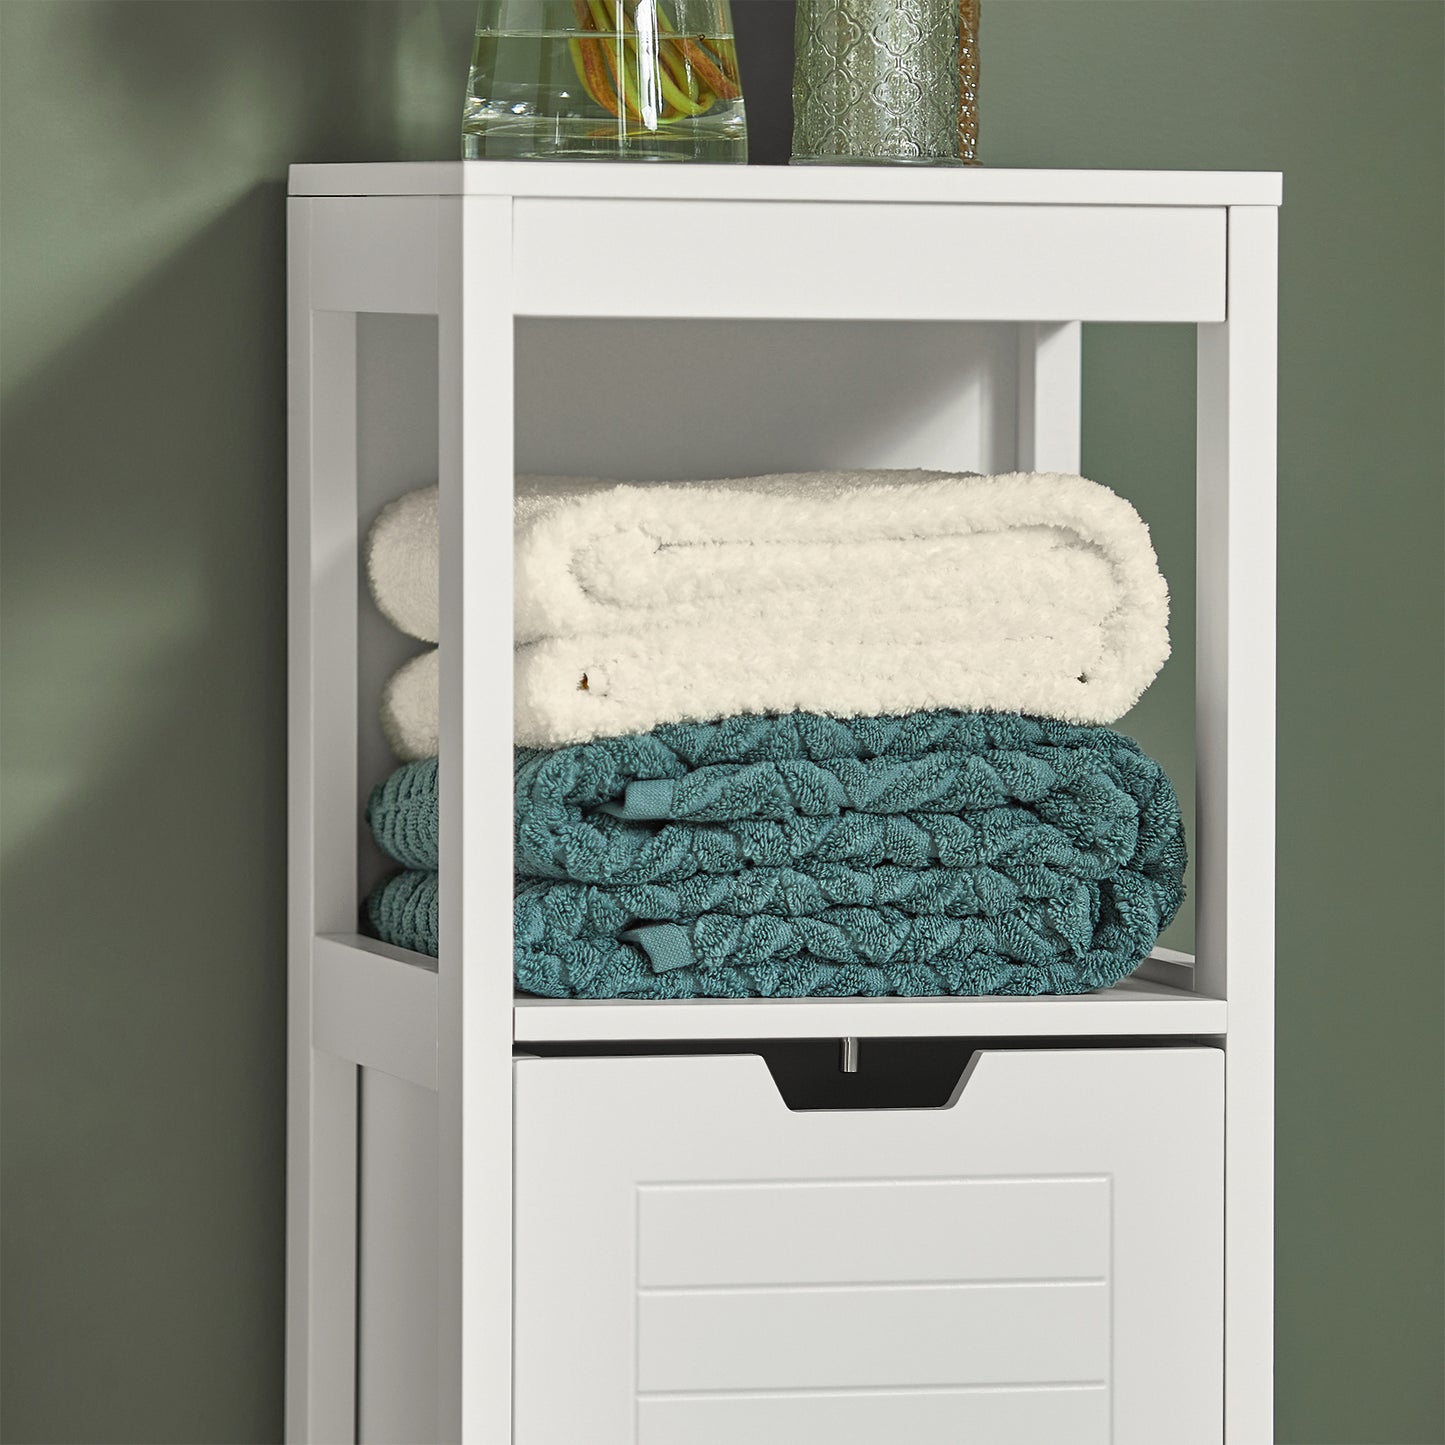 SoBuy Freestanding Cabinet, 2 Drawers and Shelf, Cupboard for Bathroom, Bedroom, Standing Shelves with Drawers